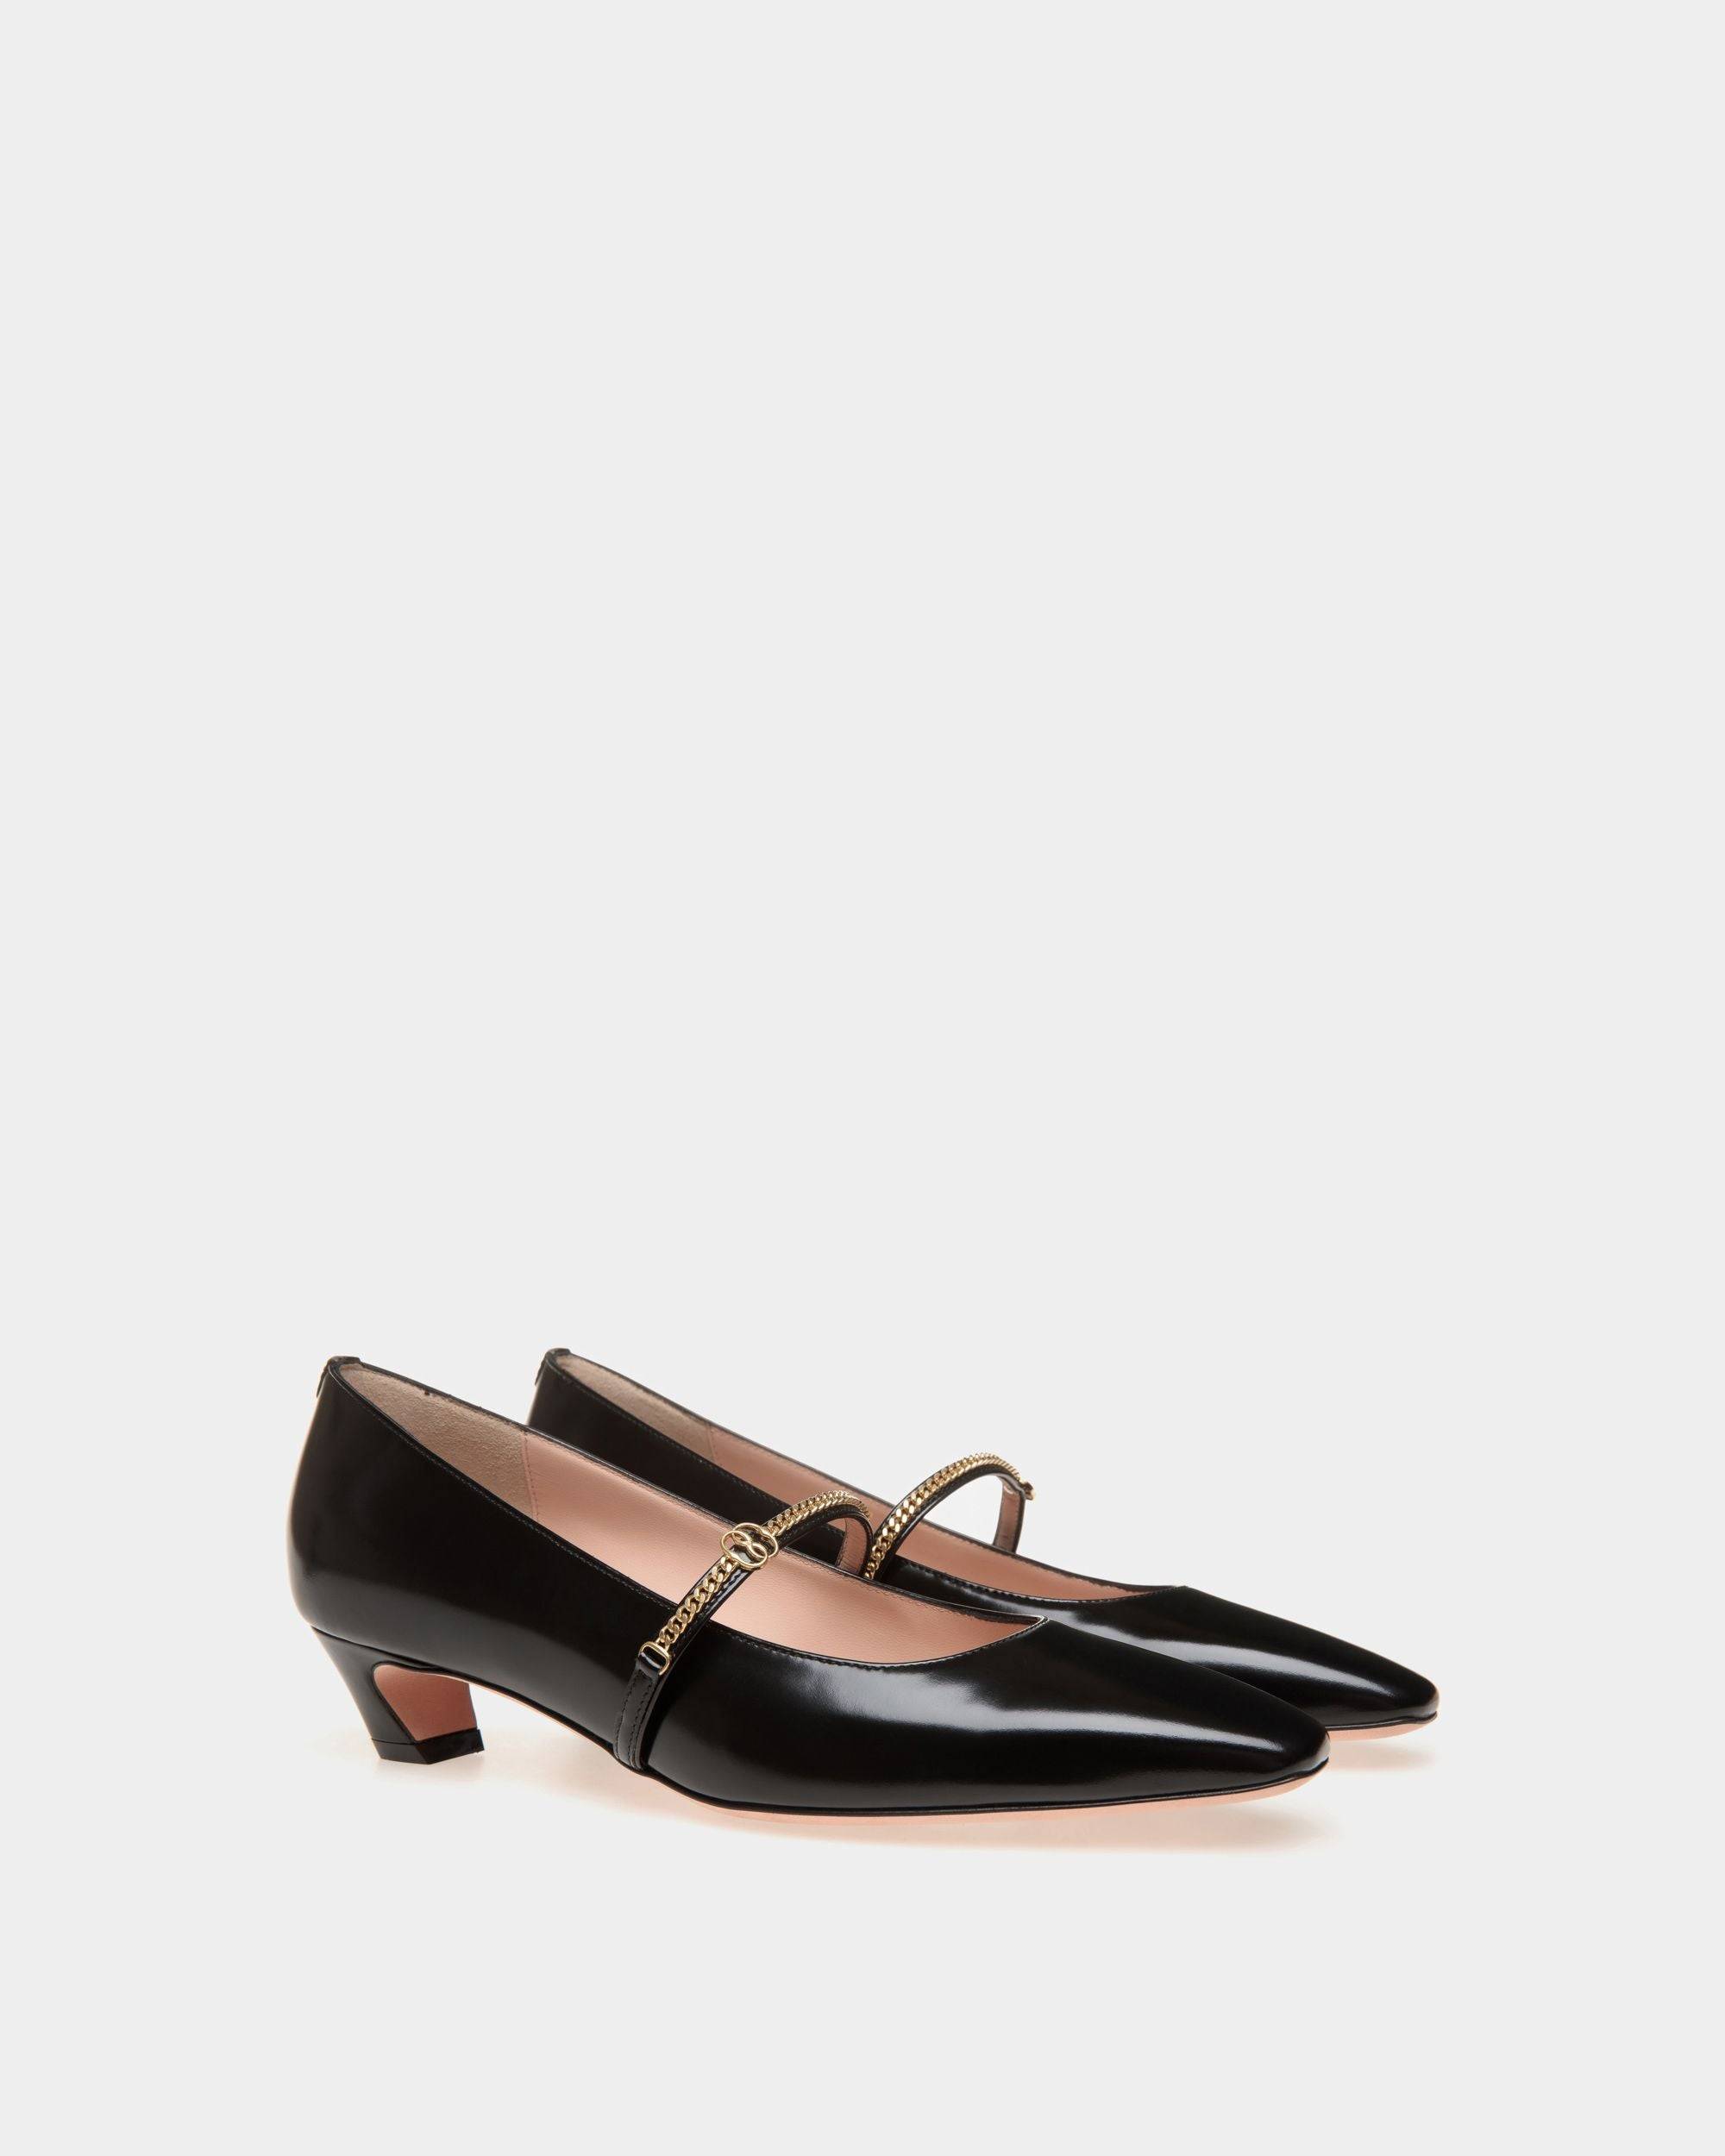 Sylt | Women's Mary-Jane Pump in Black Leather | Bally | Still Life 3/4 Front